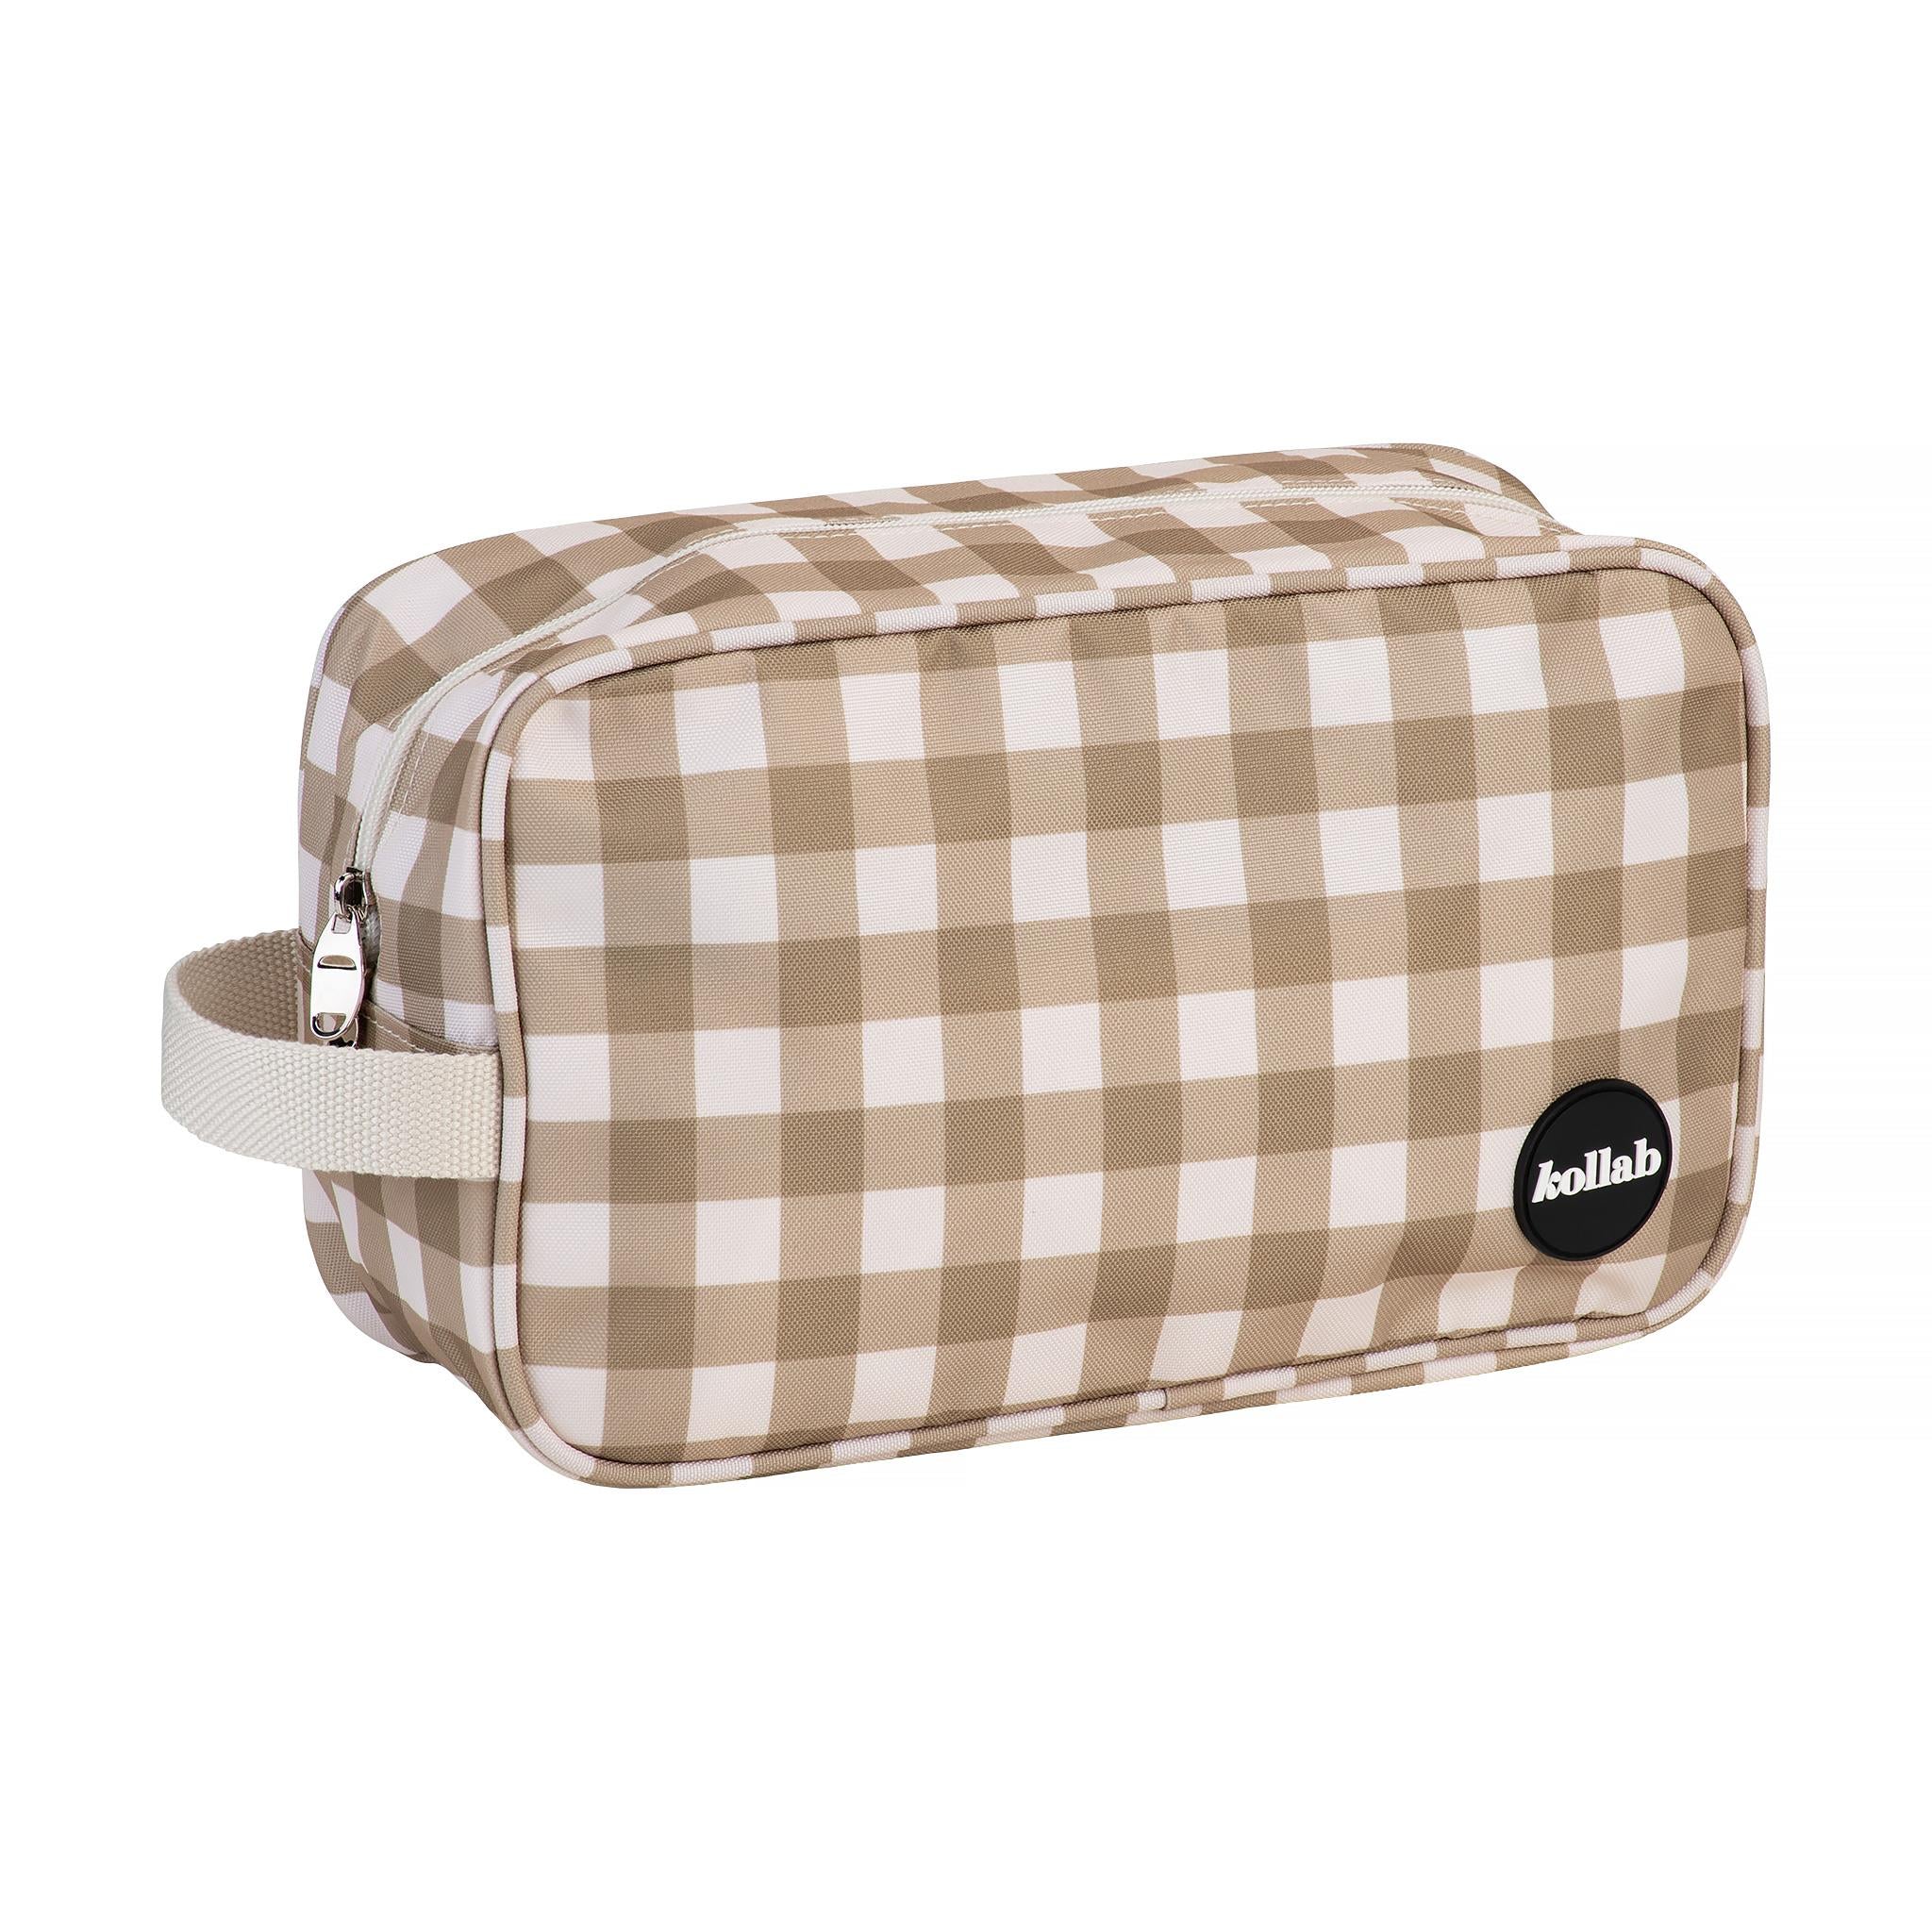 Holiday Travel Bag Olive Check-Travel & Outdoors-Kollab-The Bay Room